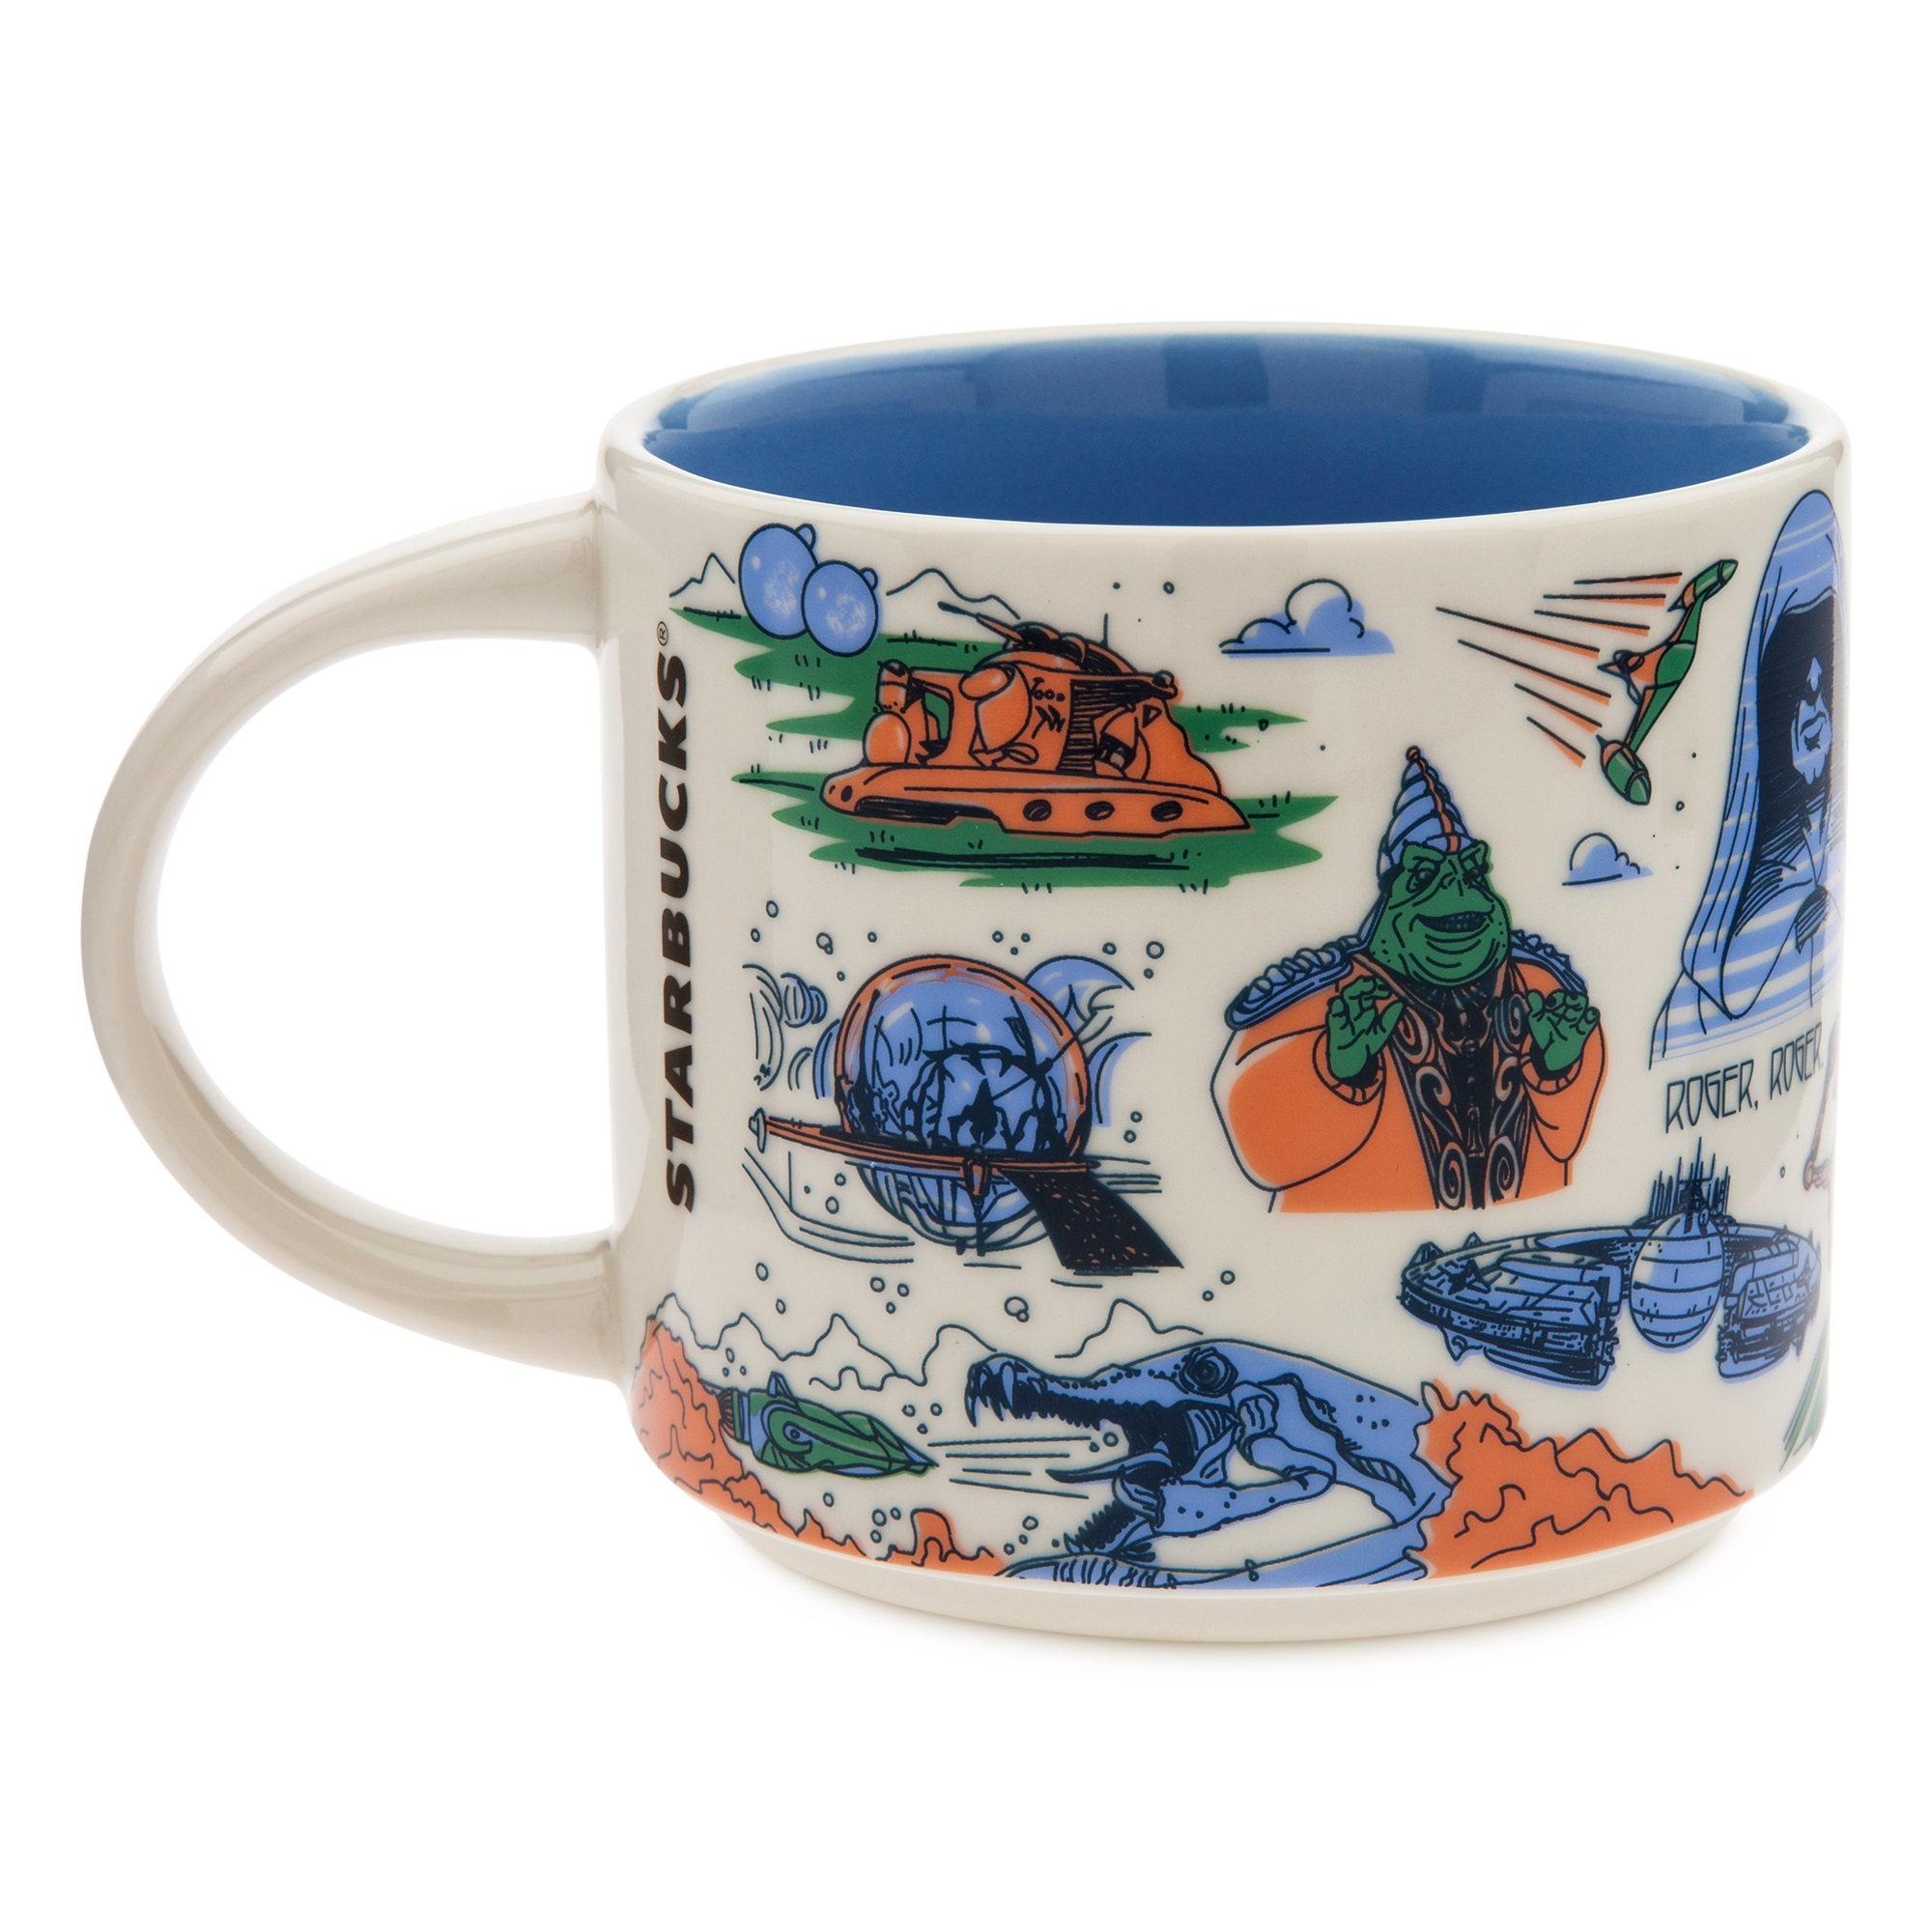 New 'Star Wars' Naboo, Ahch-To, and Nevarro Starbucks Mugs at